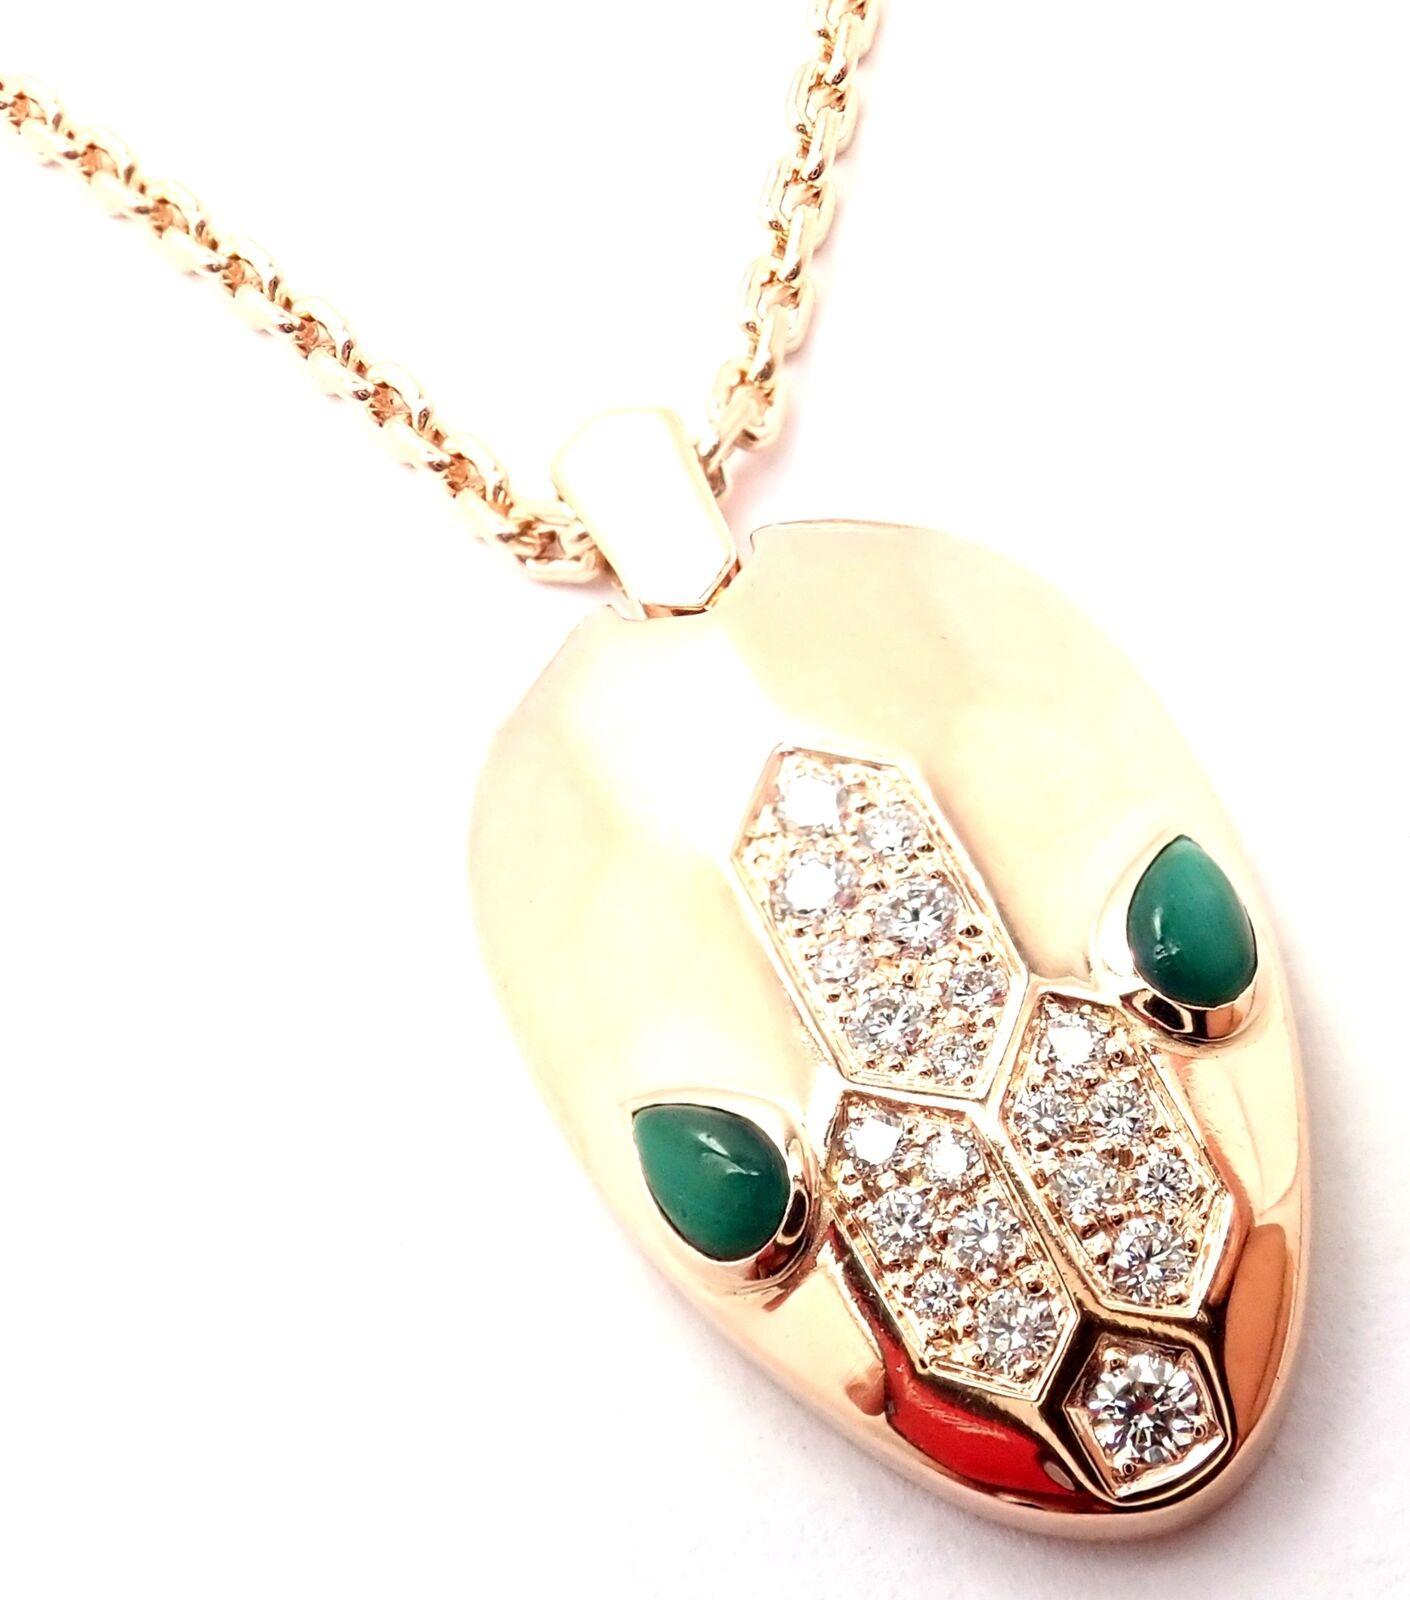 18k Rose Gold Diamond Malachite Serpenti Pendant Necklace by Bulgari. 
With 21x round brilliant cut diamonds VS1 clarity, G color total weight approx. .21ct
2 malachite stones
This necklace comes with Bulgari Box.
Details:
Chain Length: